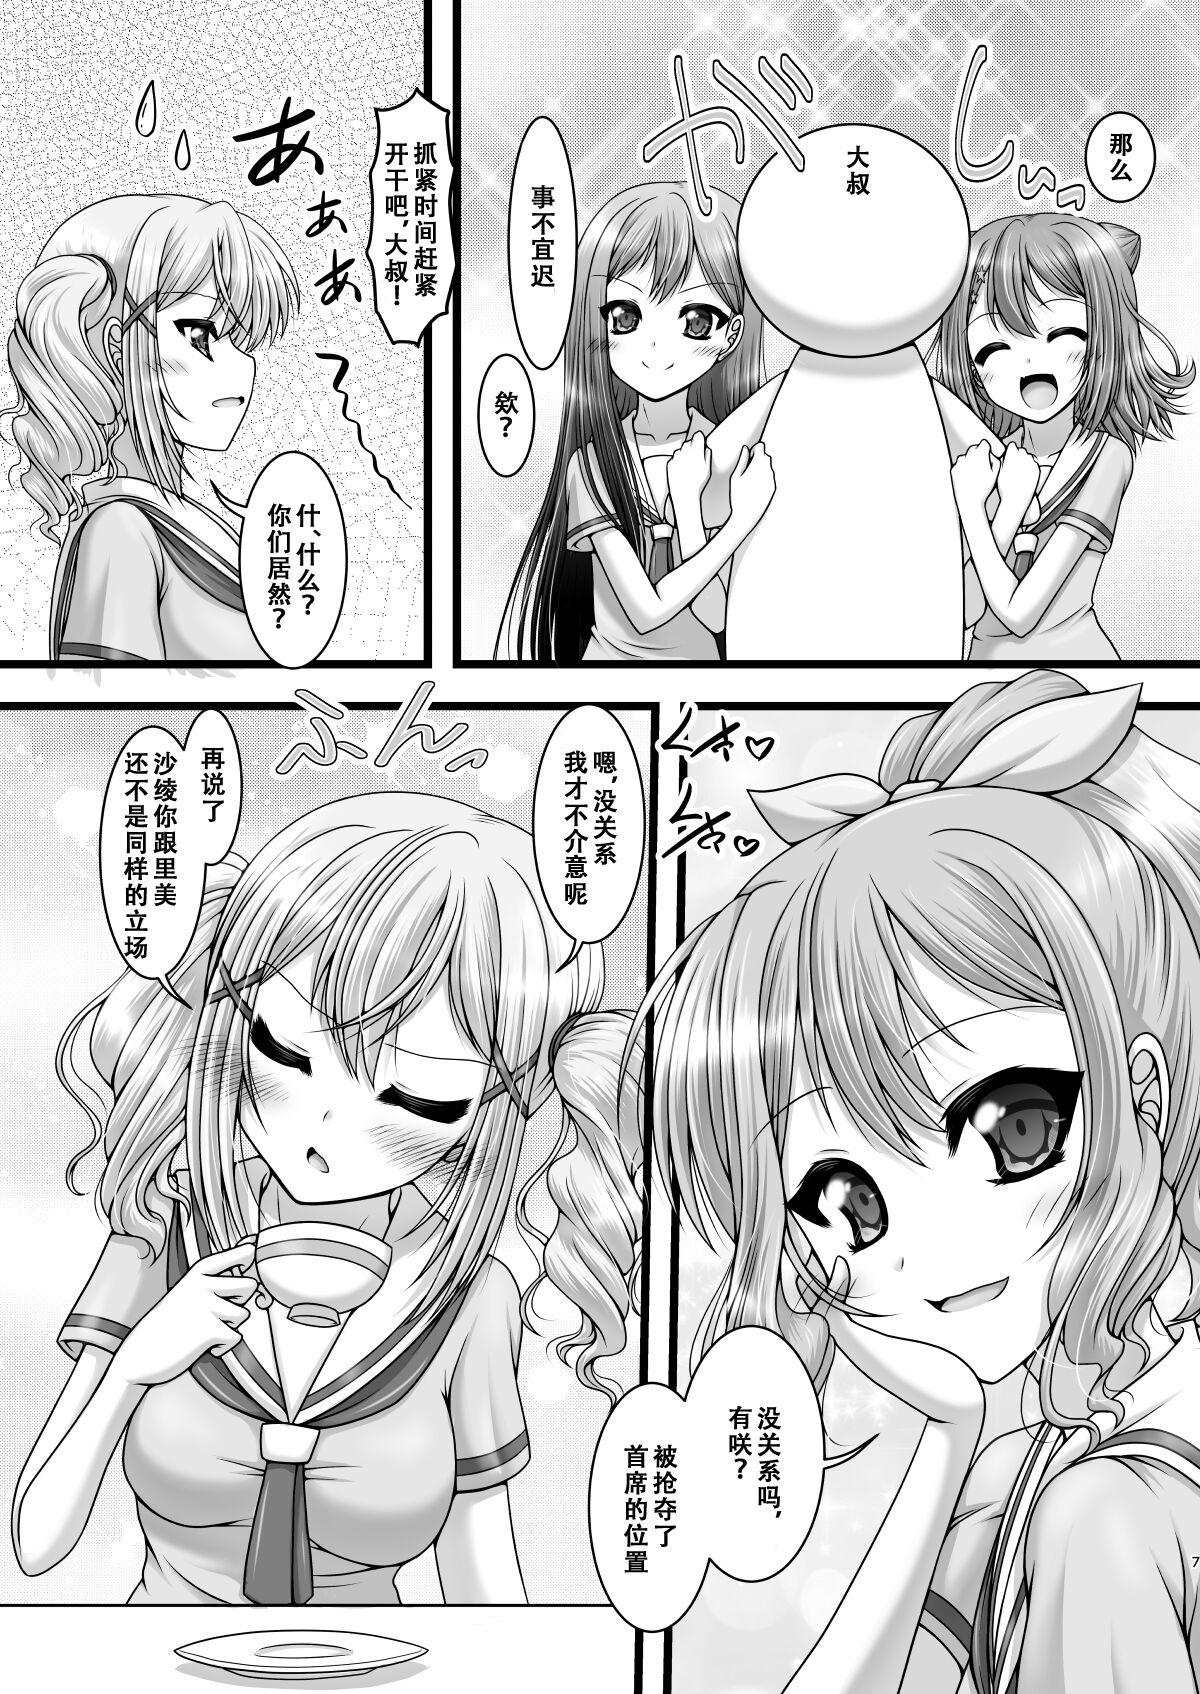 Roludo Twinkle Express - Bang dream Cogida - Page 7